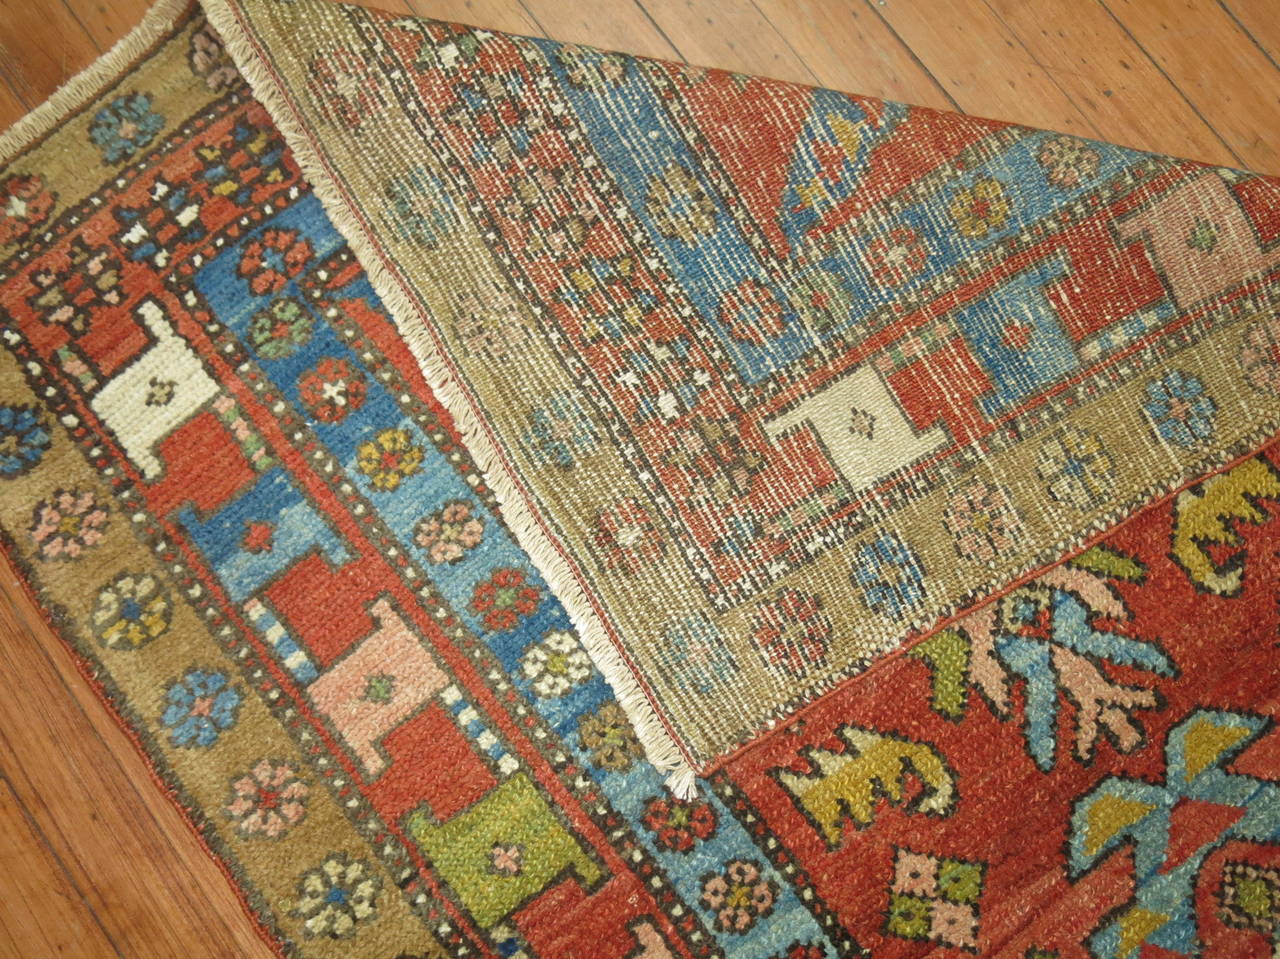 Exquisite Persian Bakshaish rug. Great colors and condition. Would make for a great wall hanging too. Light Blue and Green dominant Accents n a rusty Orange ground

Measures: 2'10'' x 3'10''

Bakshaish is widely known carpet weaving from the